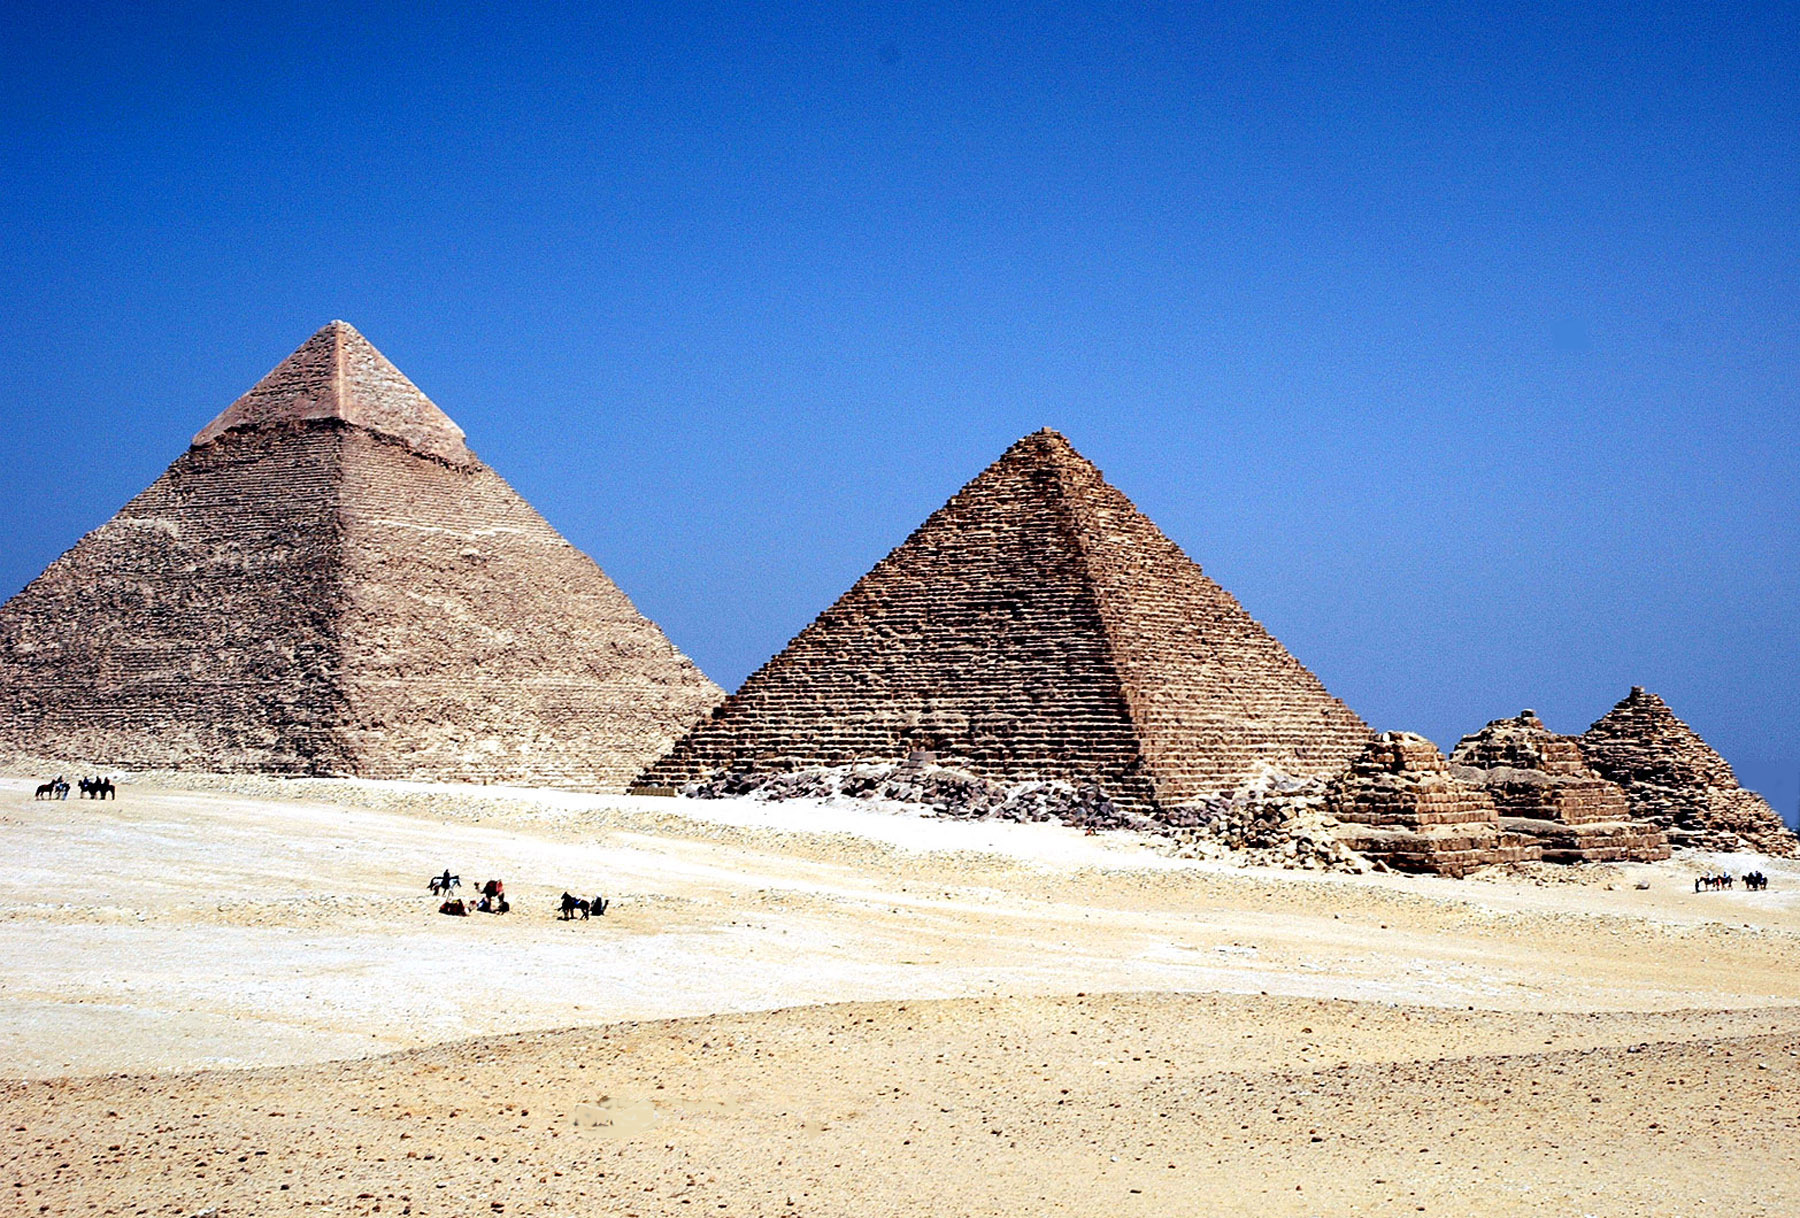 Eclipse 2006 - A20 - Egypt - Pyramid Wide View